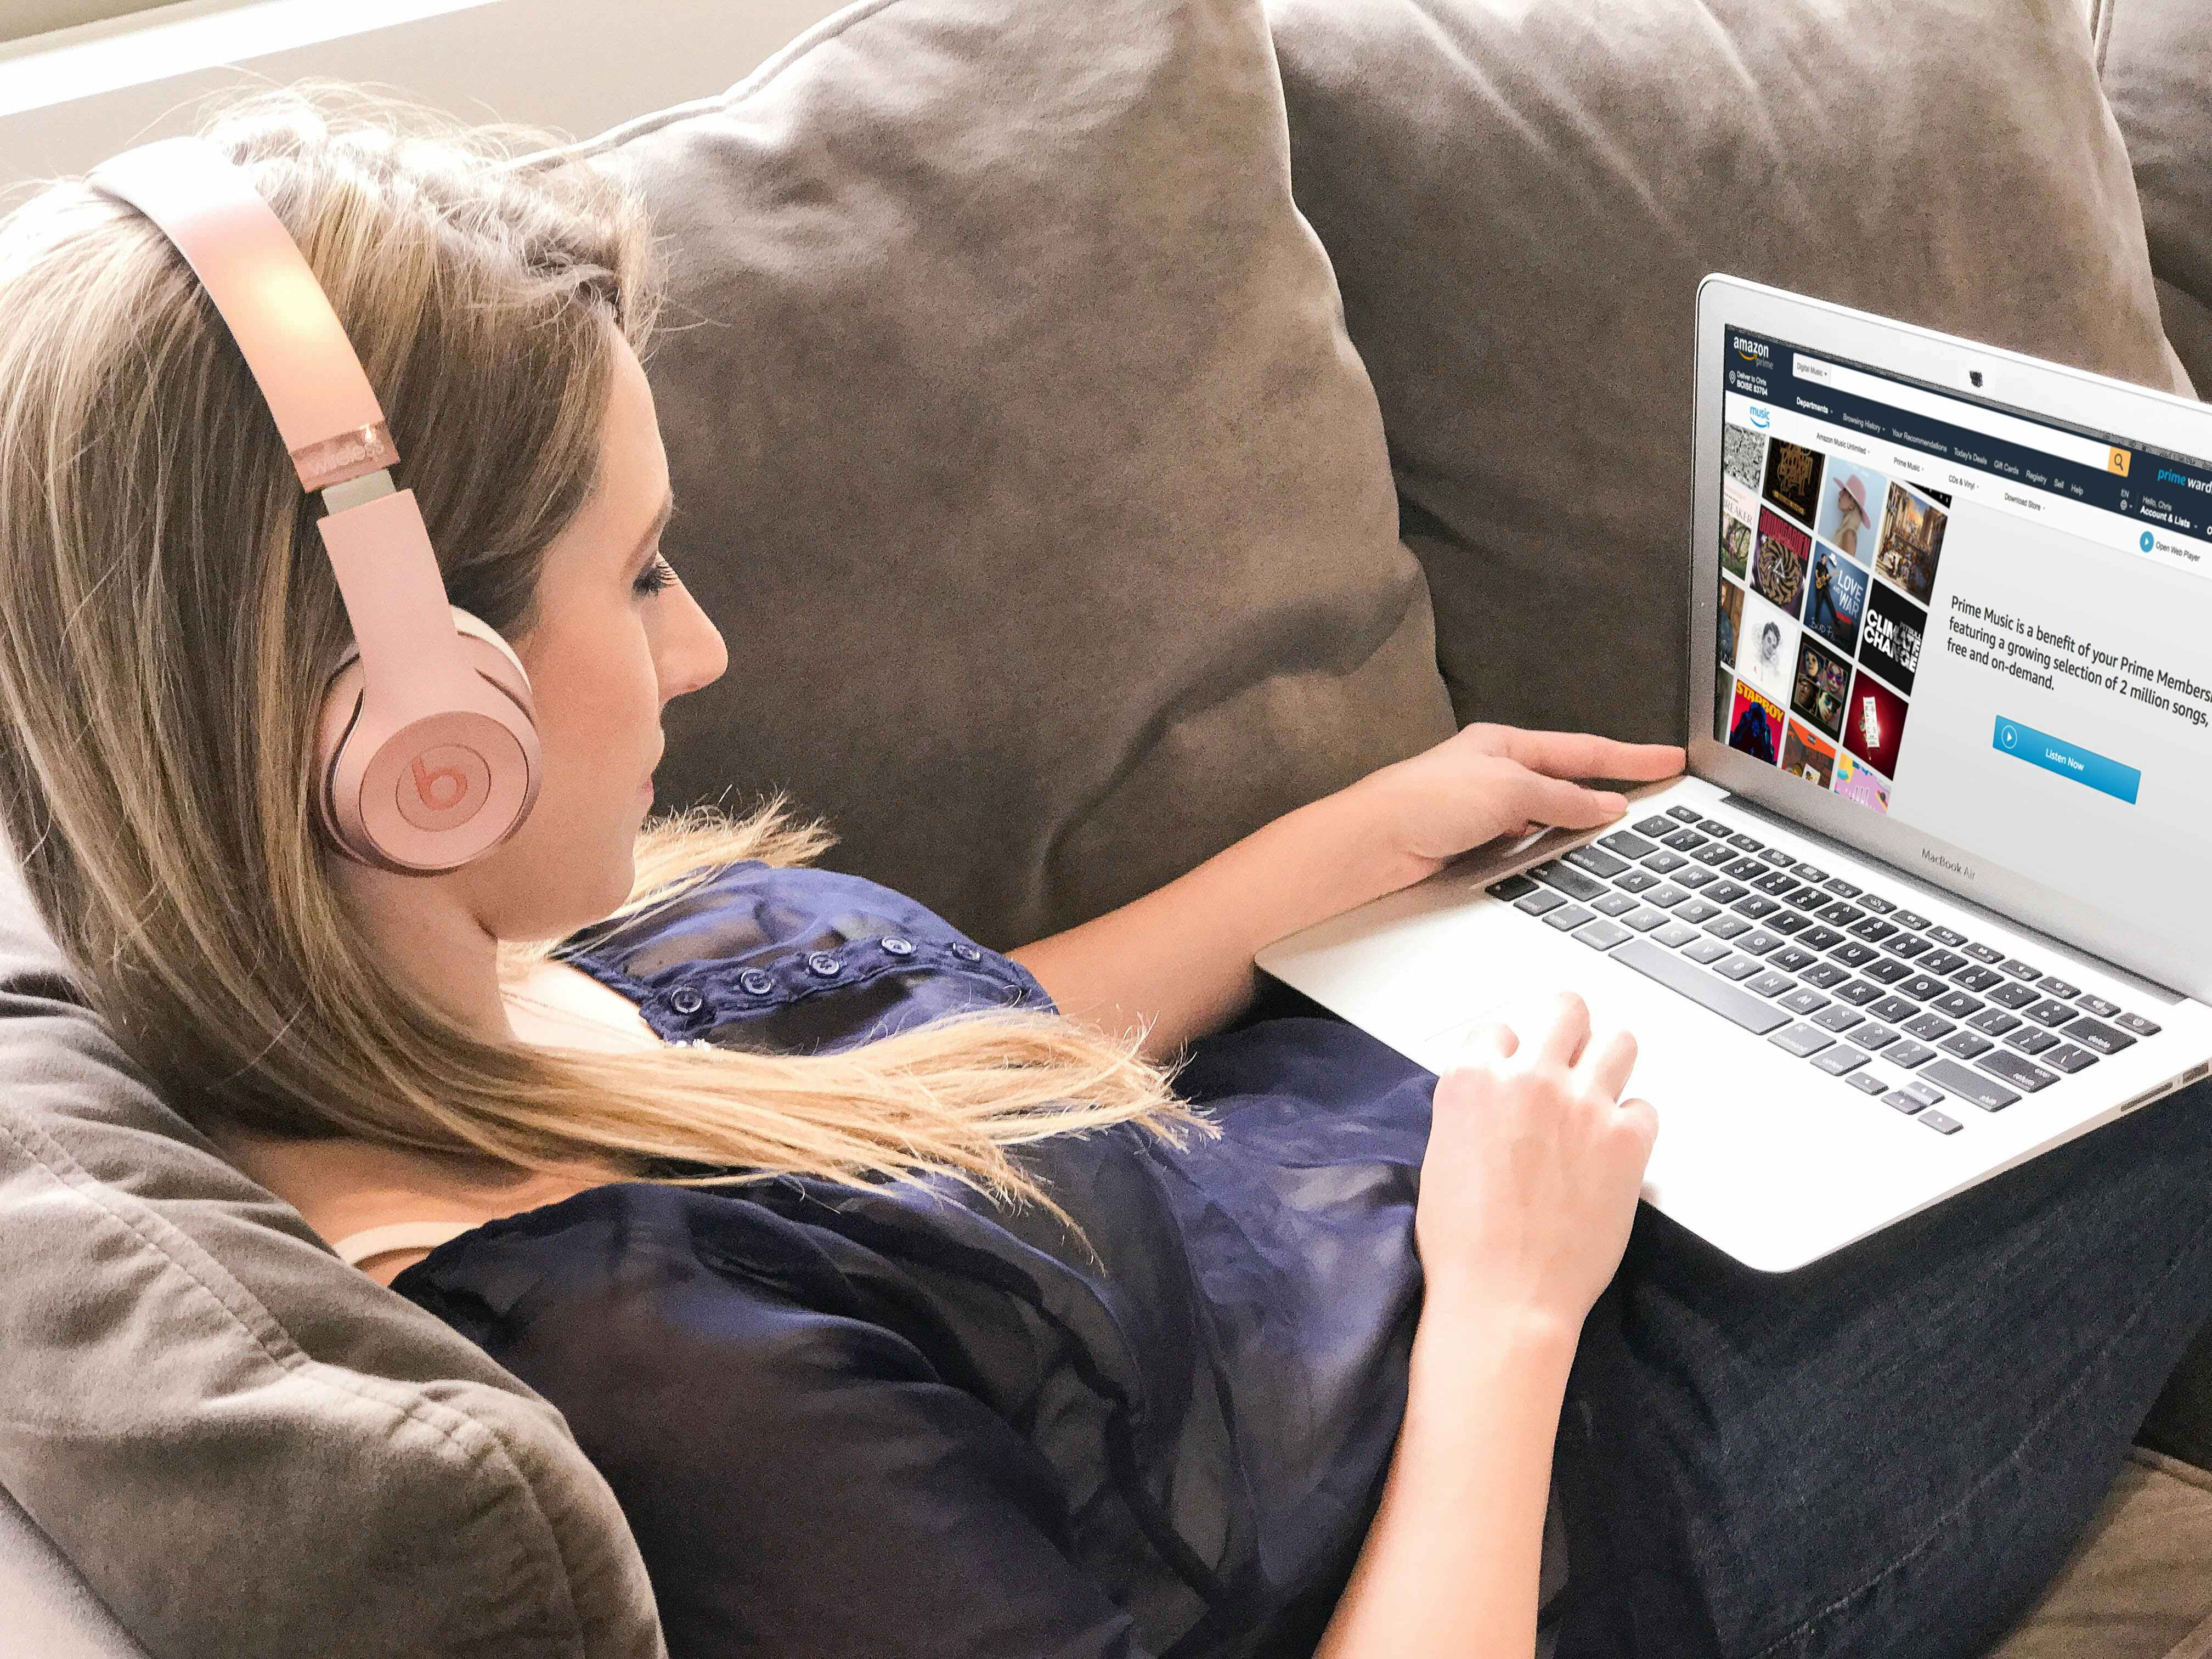 A woman, wearing headphones, sitting on a couch and using her laptop to look at Amazon's Prime Music page on their website.